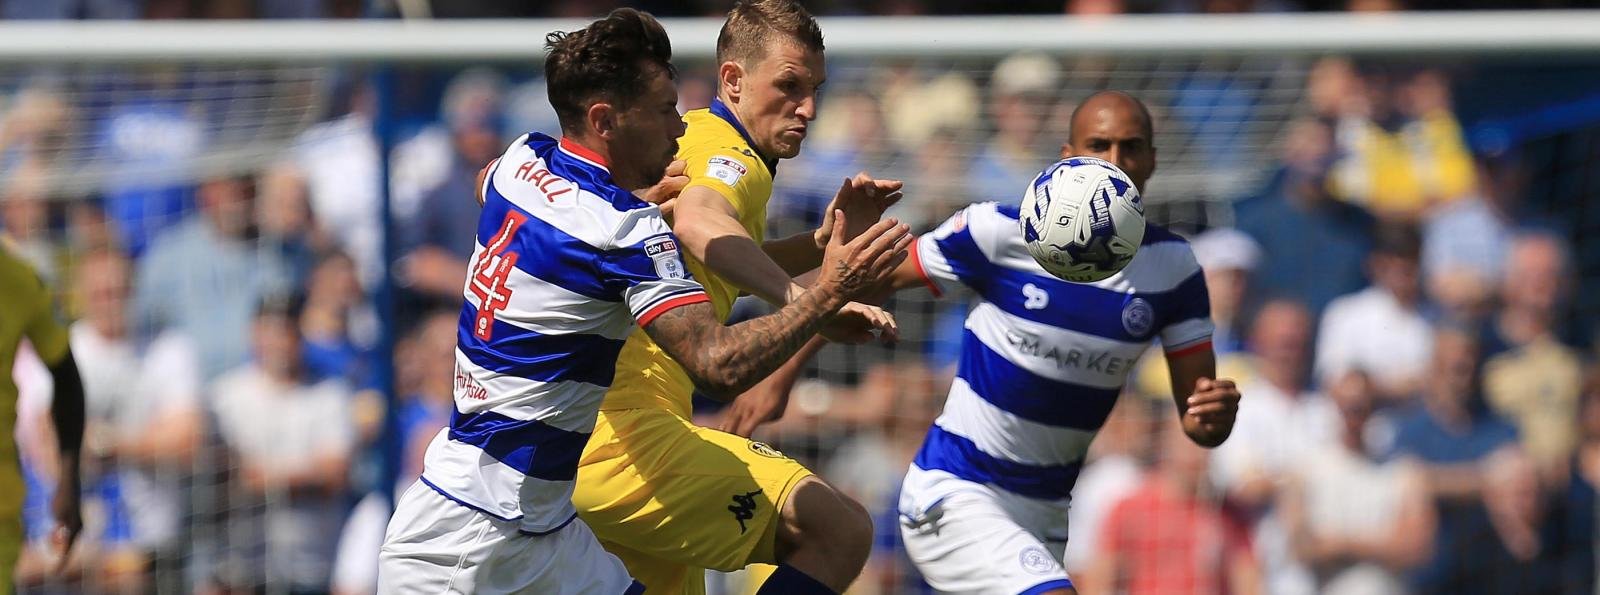 QPR show they mean business with comfortable win against Leeds